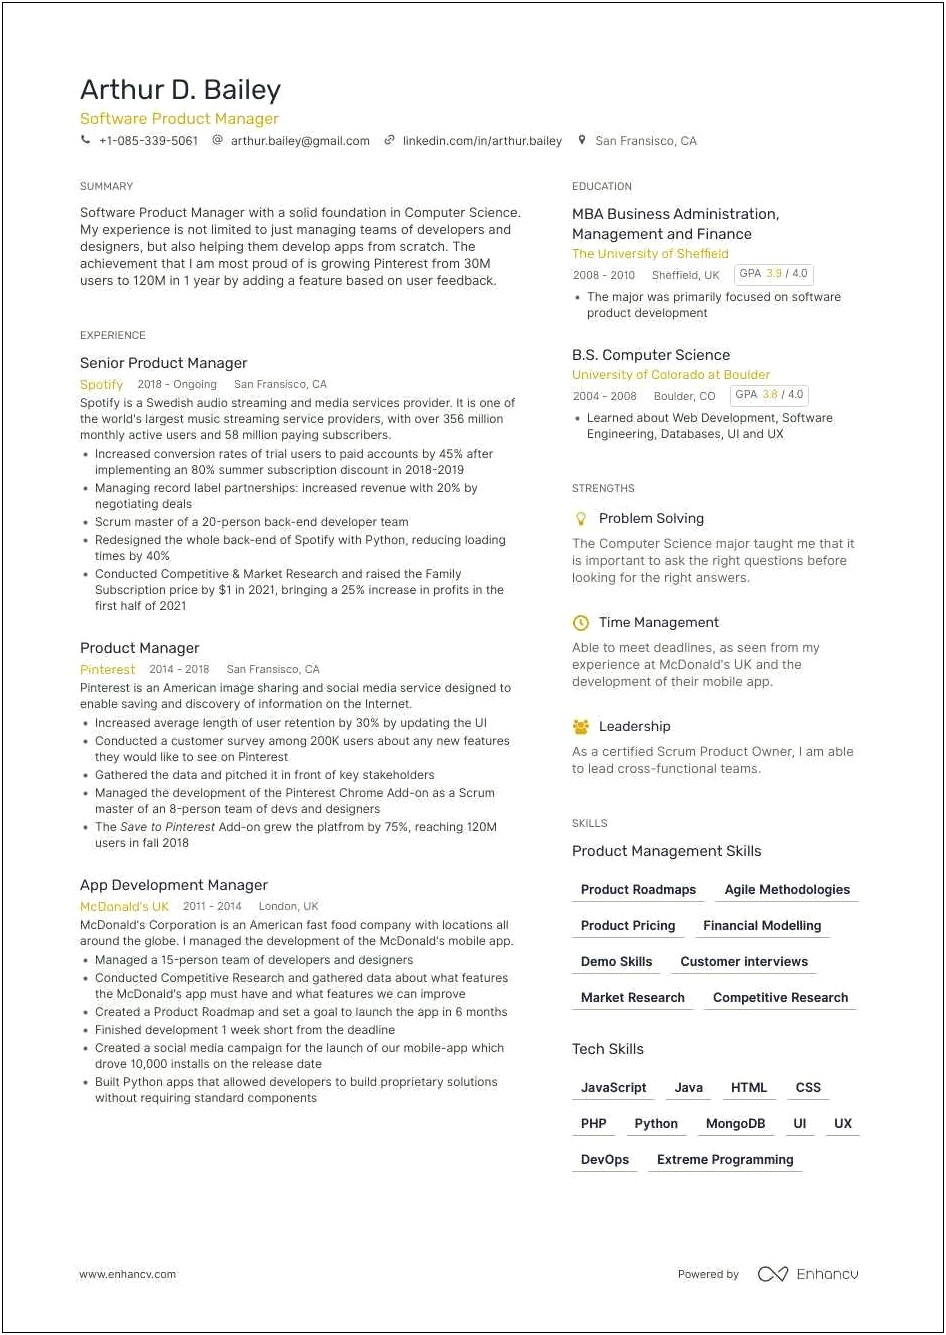 Resume For Product Manager Fresher